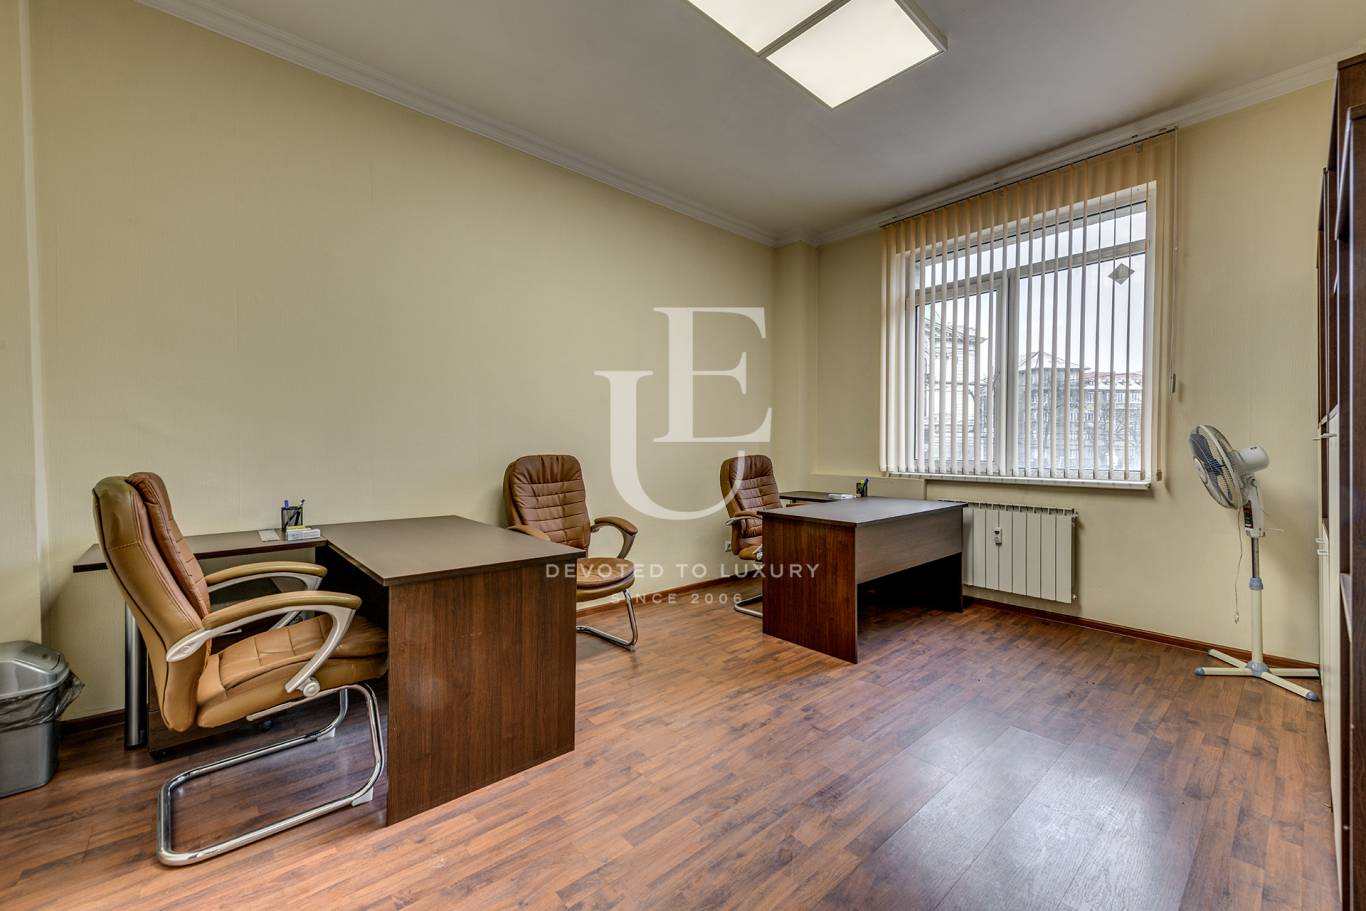 Apartment for sale in Sofia, Downtown with listing ID: K6788 - image 4